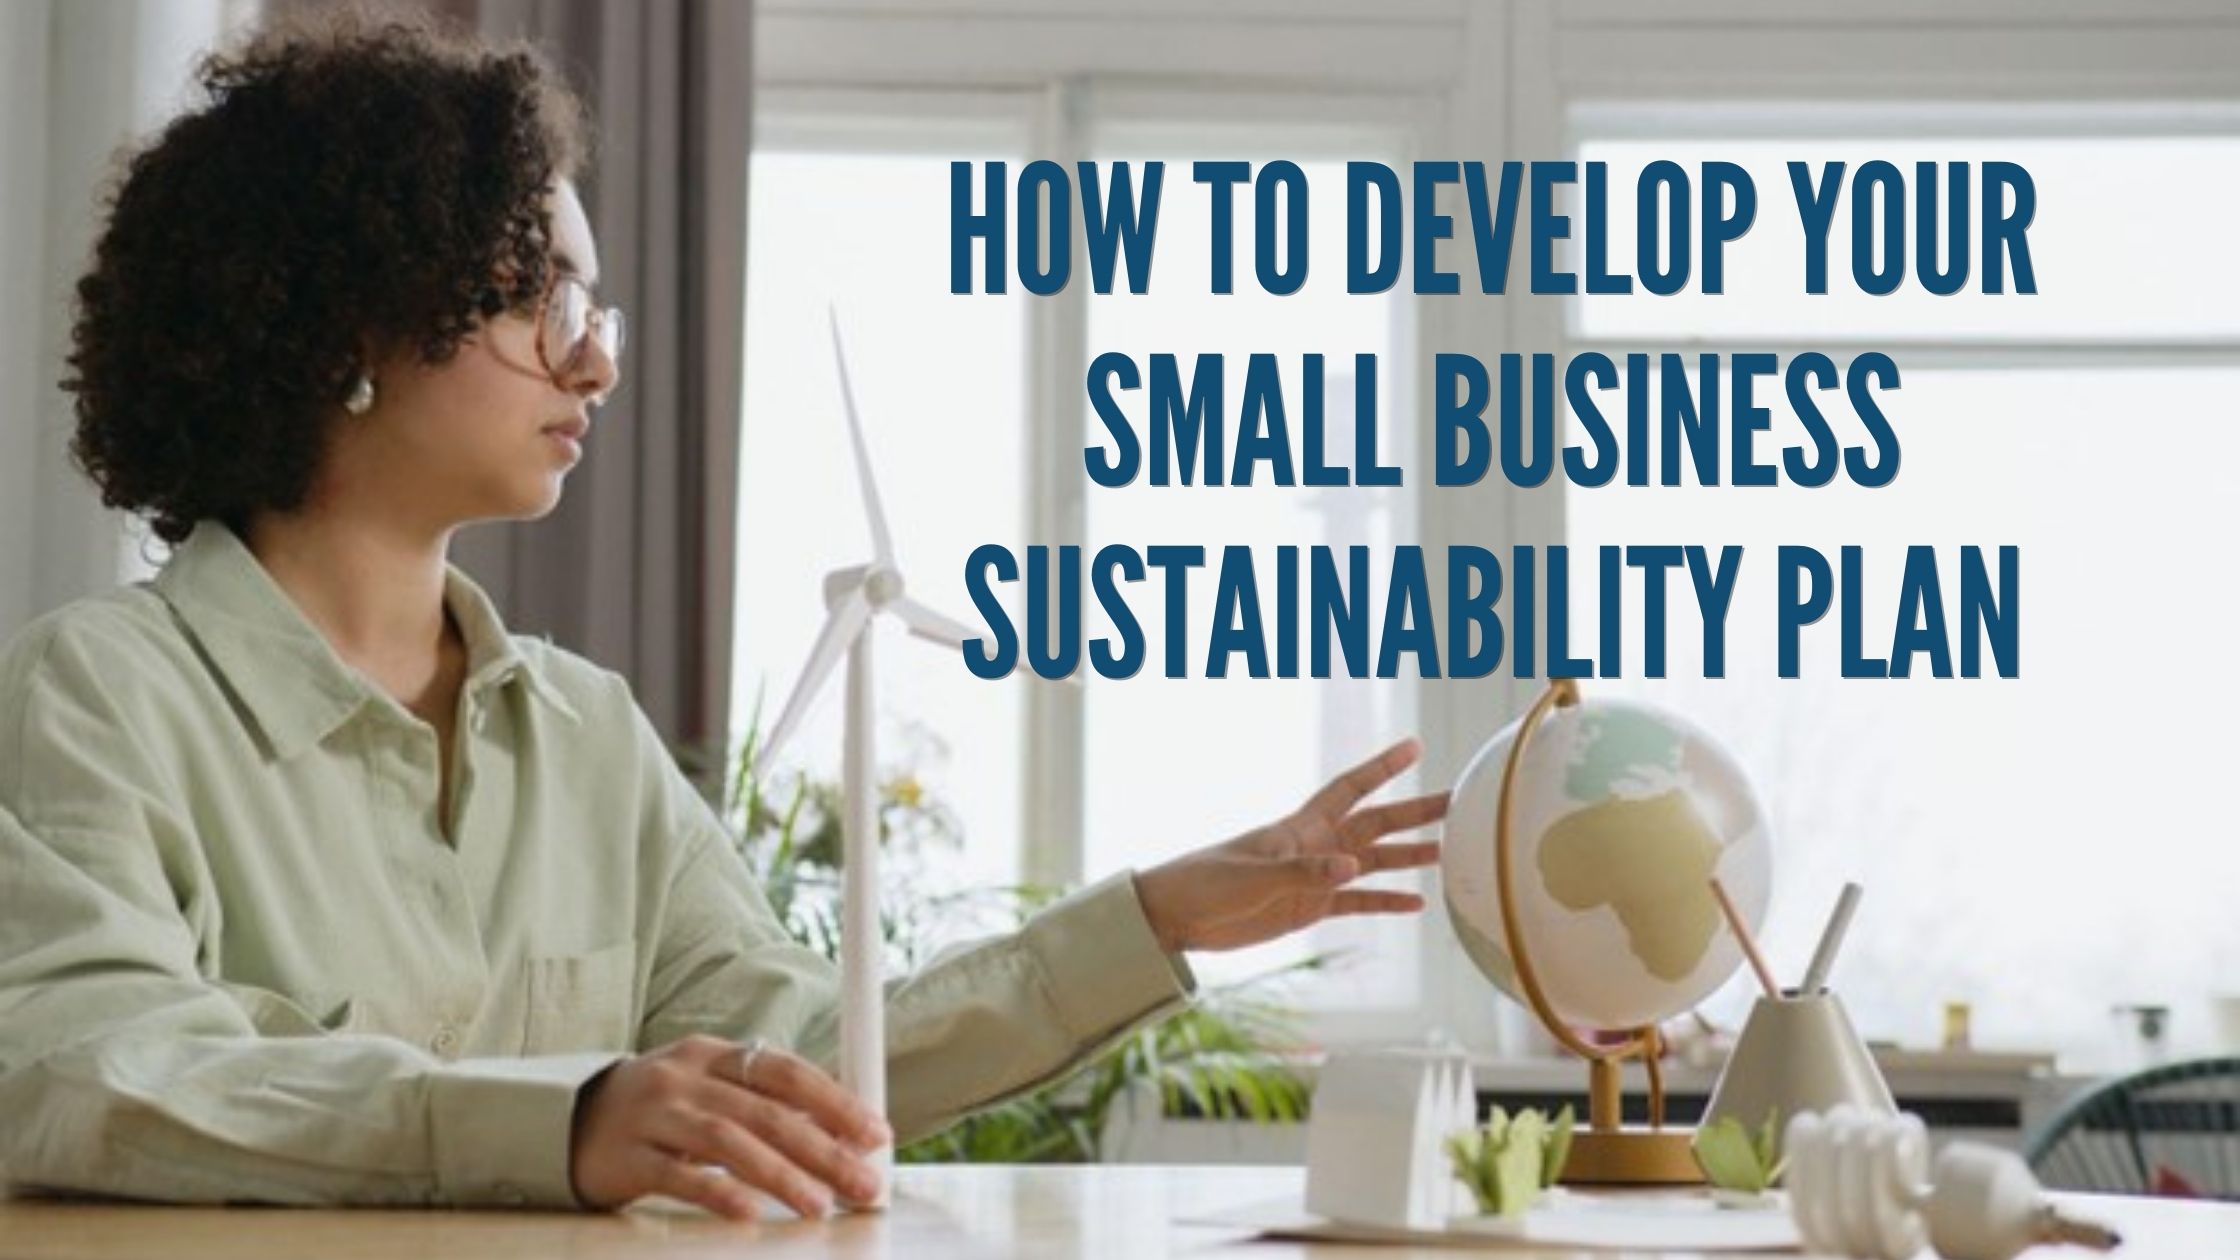 How to Develop Your Small Business Sustainability Plan